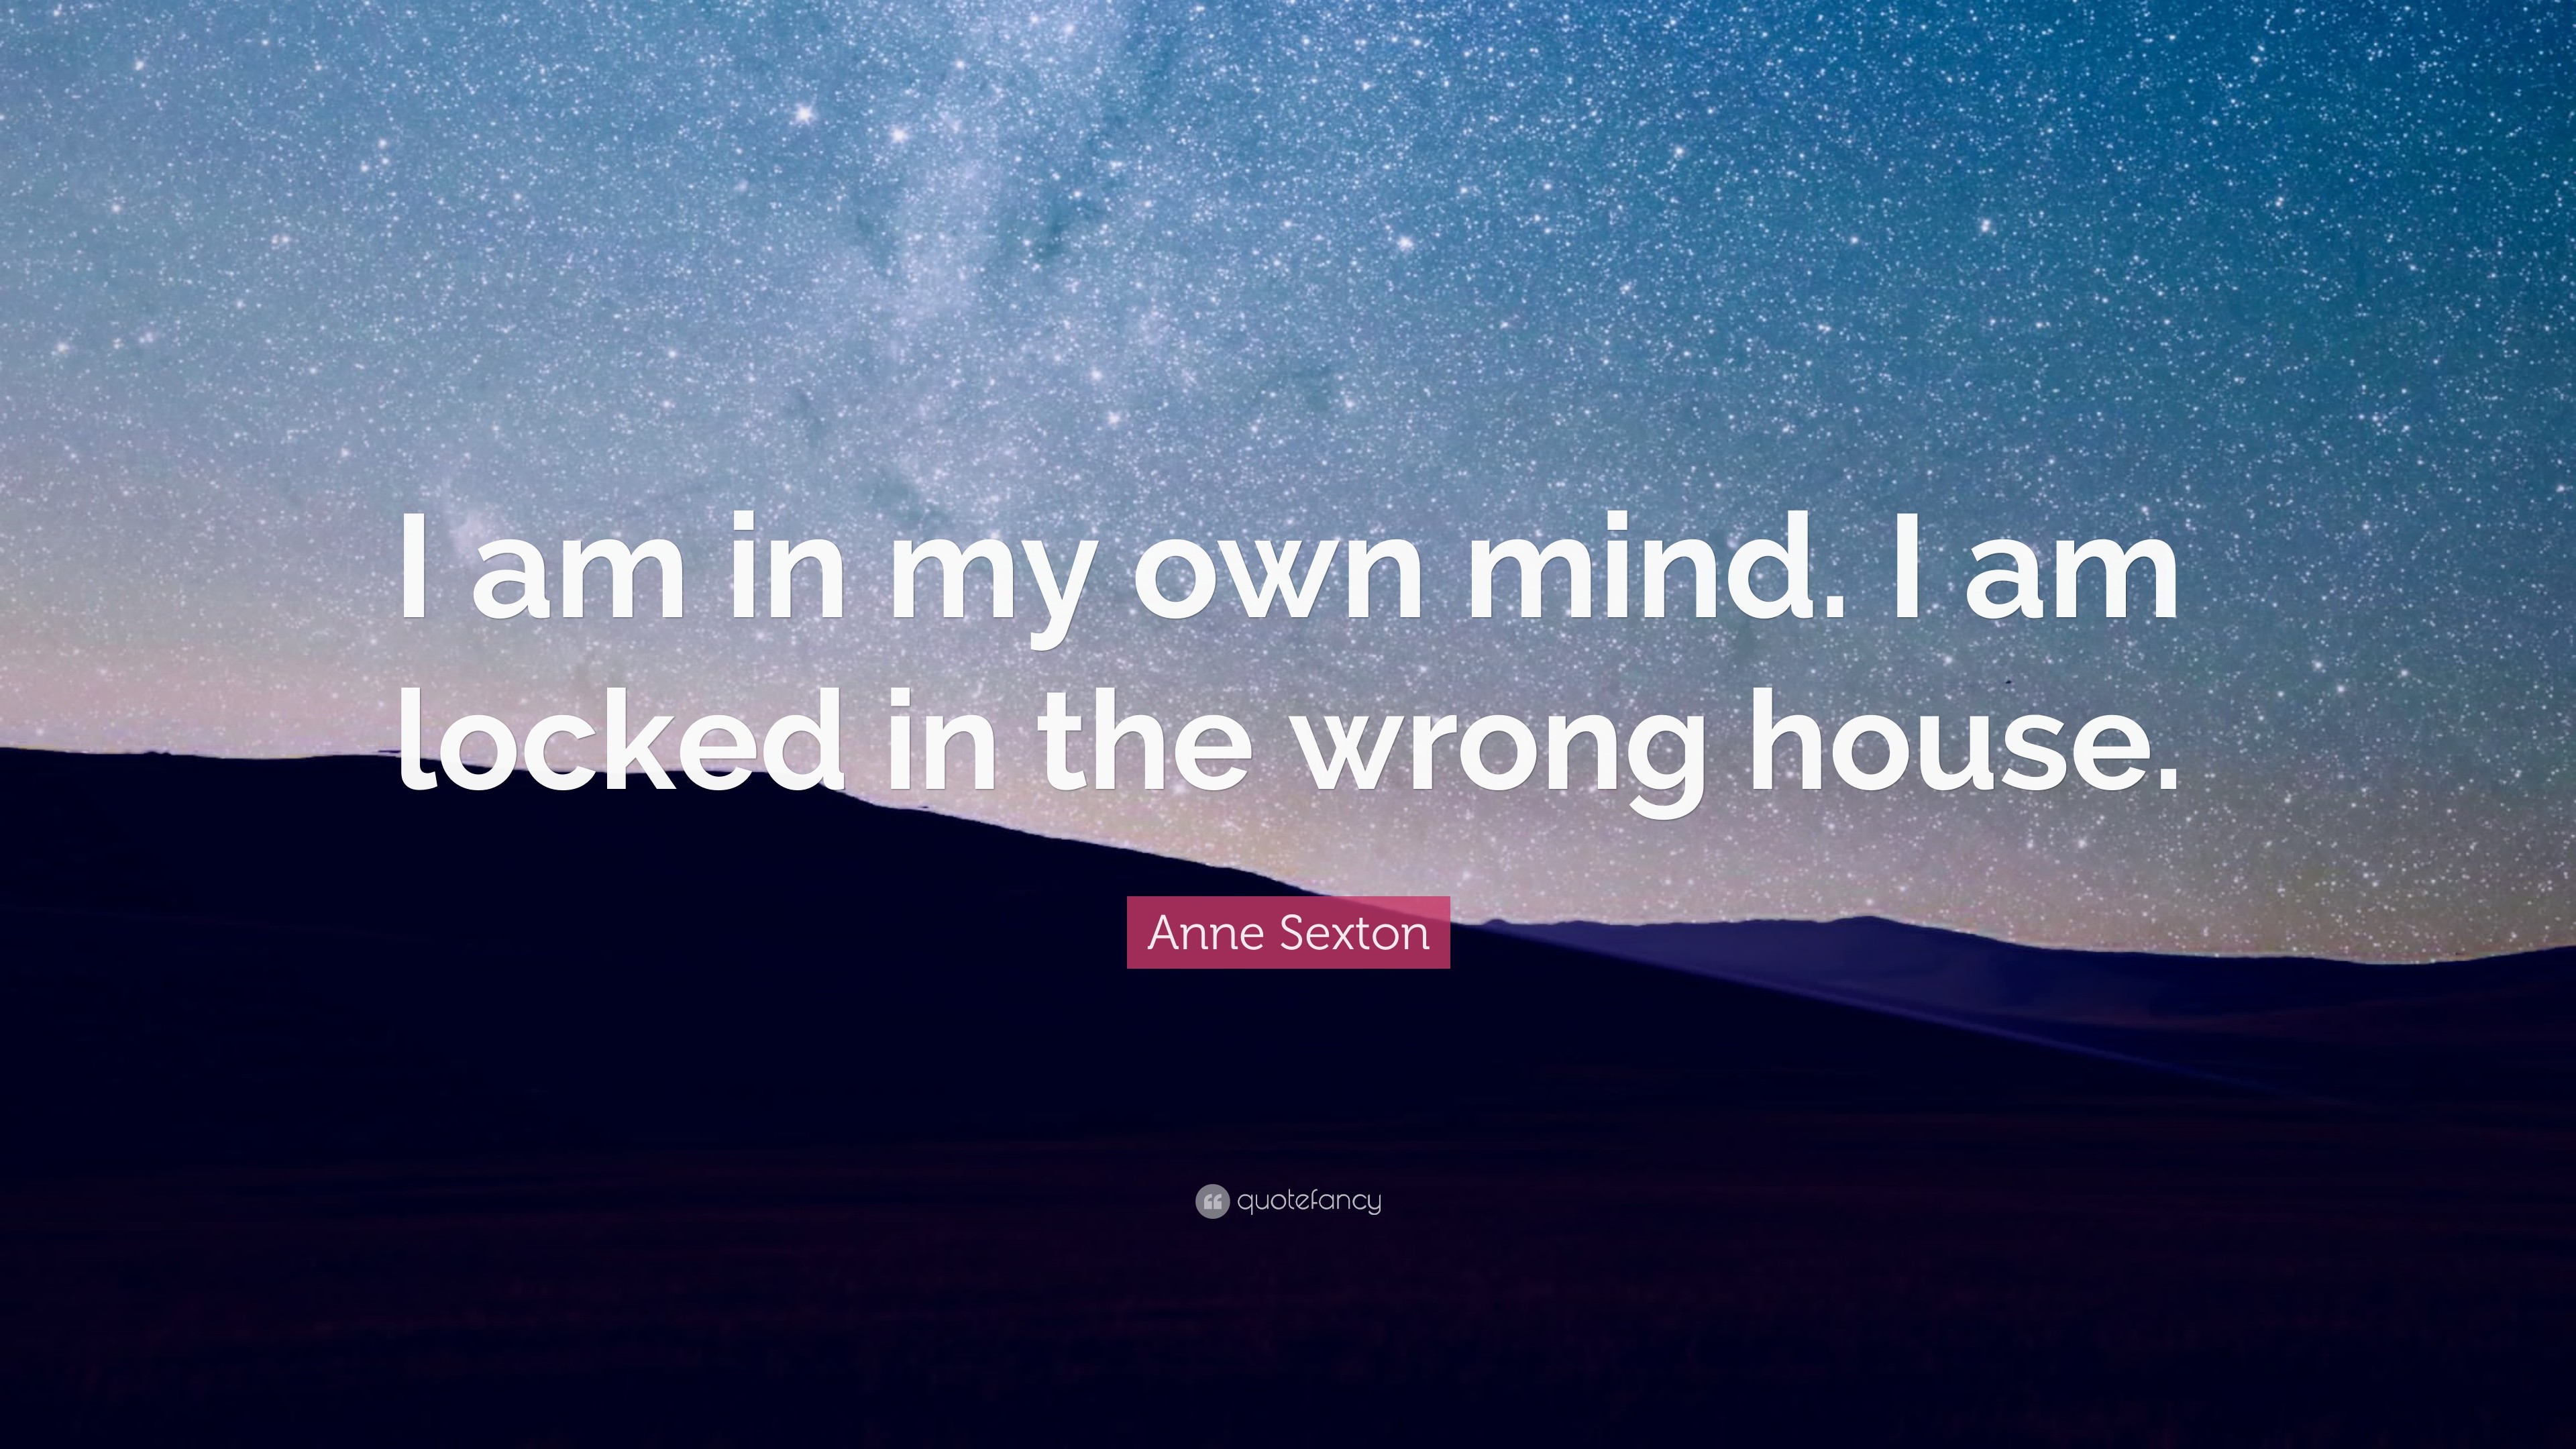 3840x2160 Anne Sexton Quote: “I am in my own mind. I am locked in